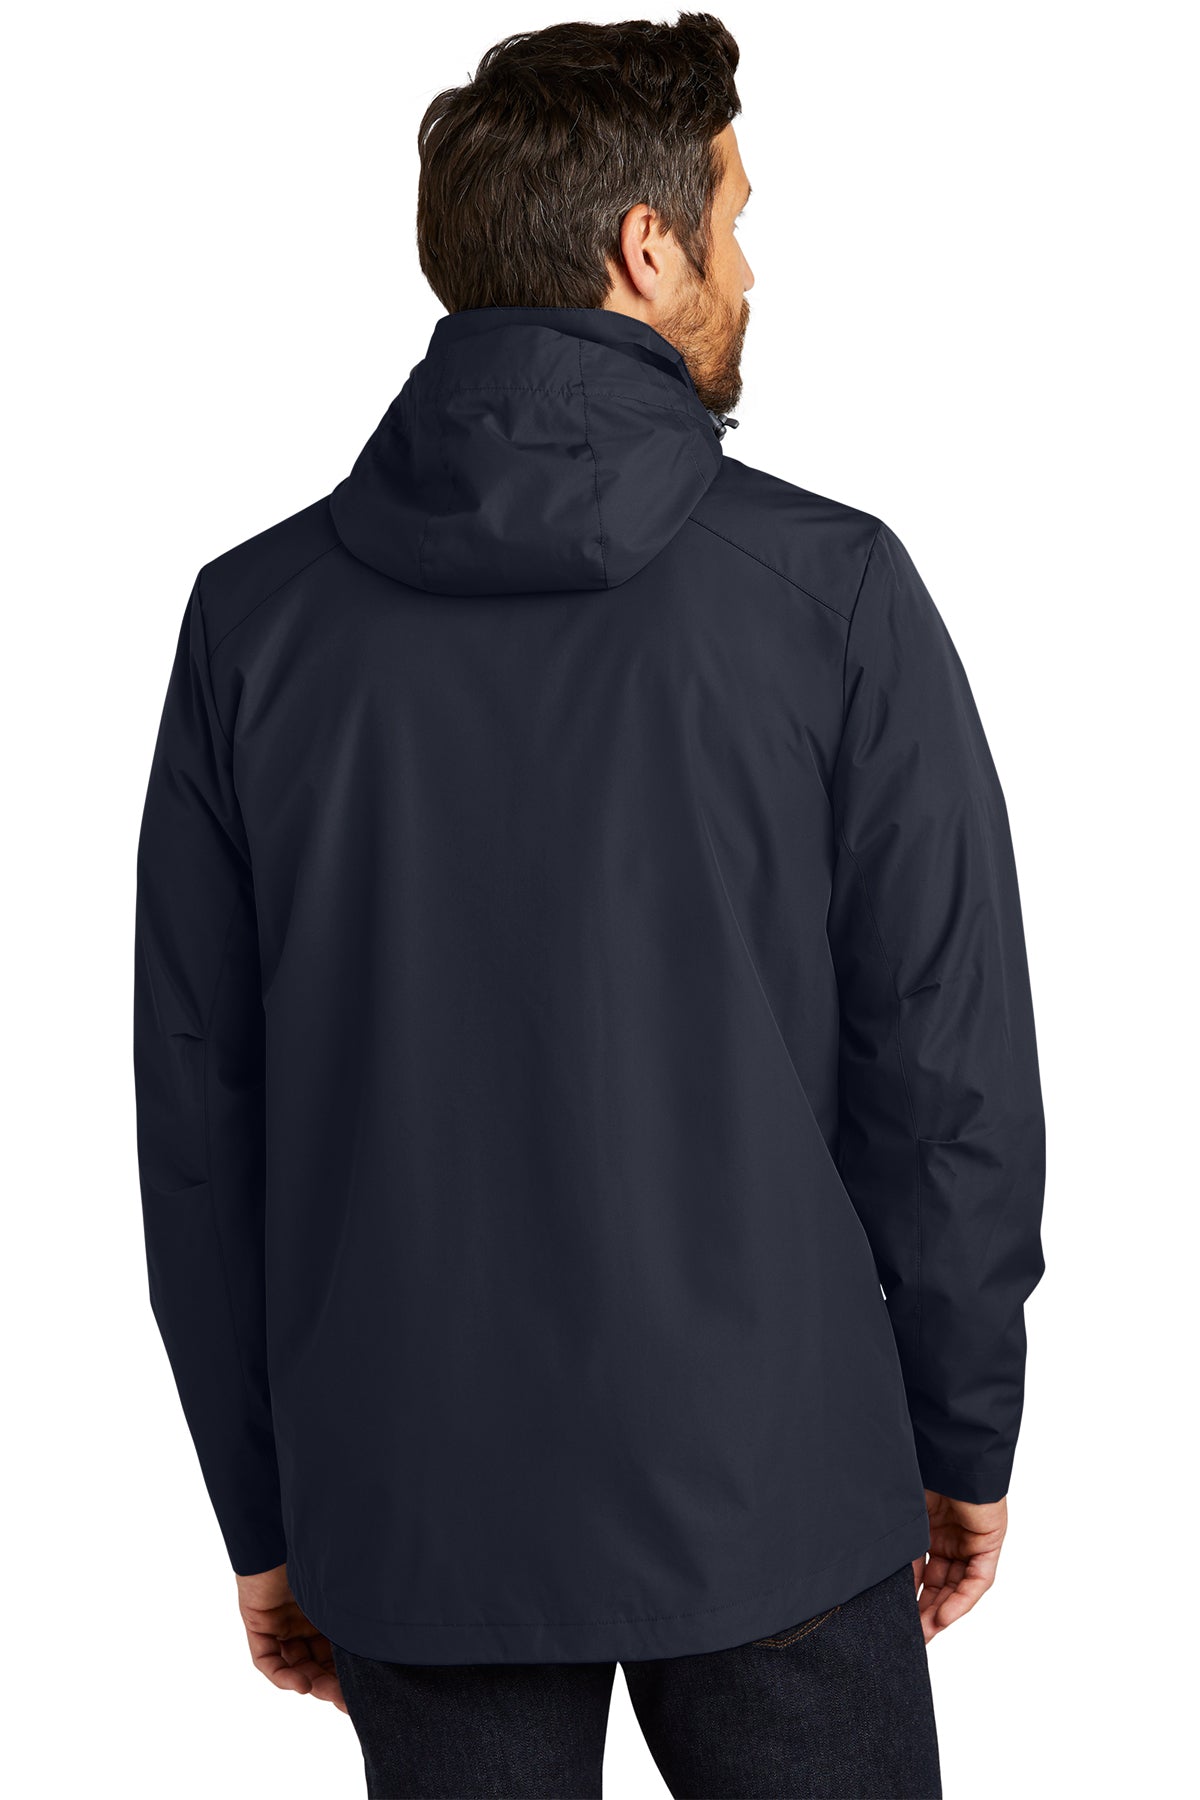 Port Authority All-Weather 3-in-1 Customized Jackets, River Blue Navy